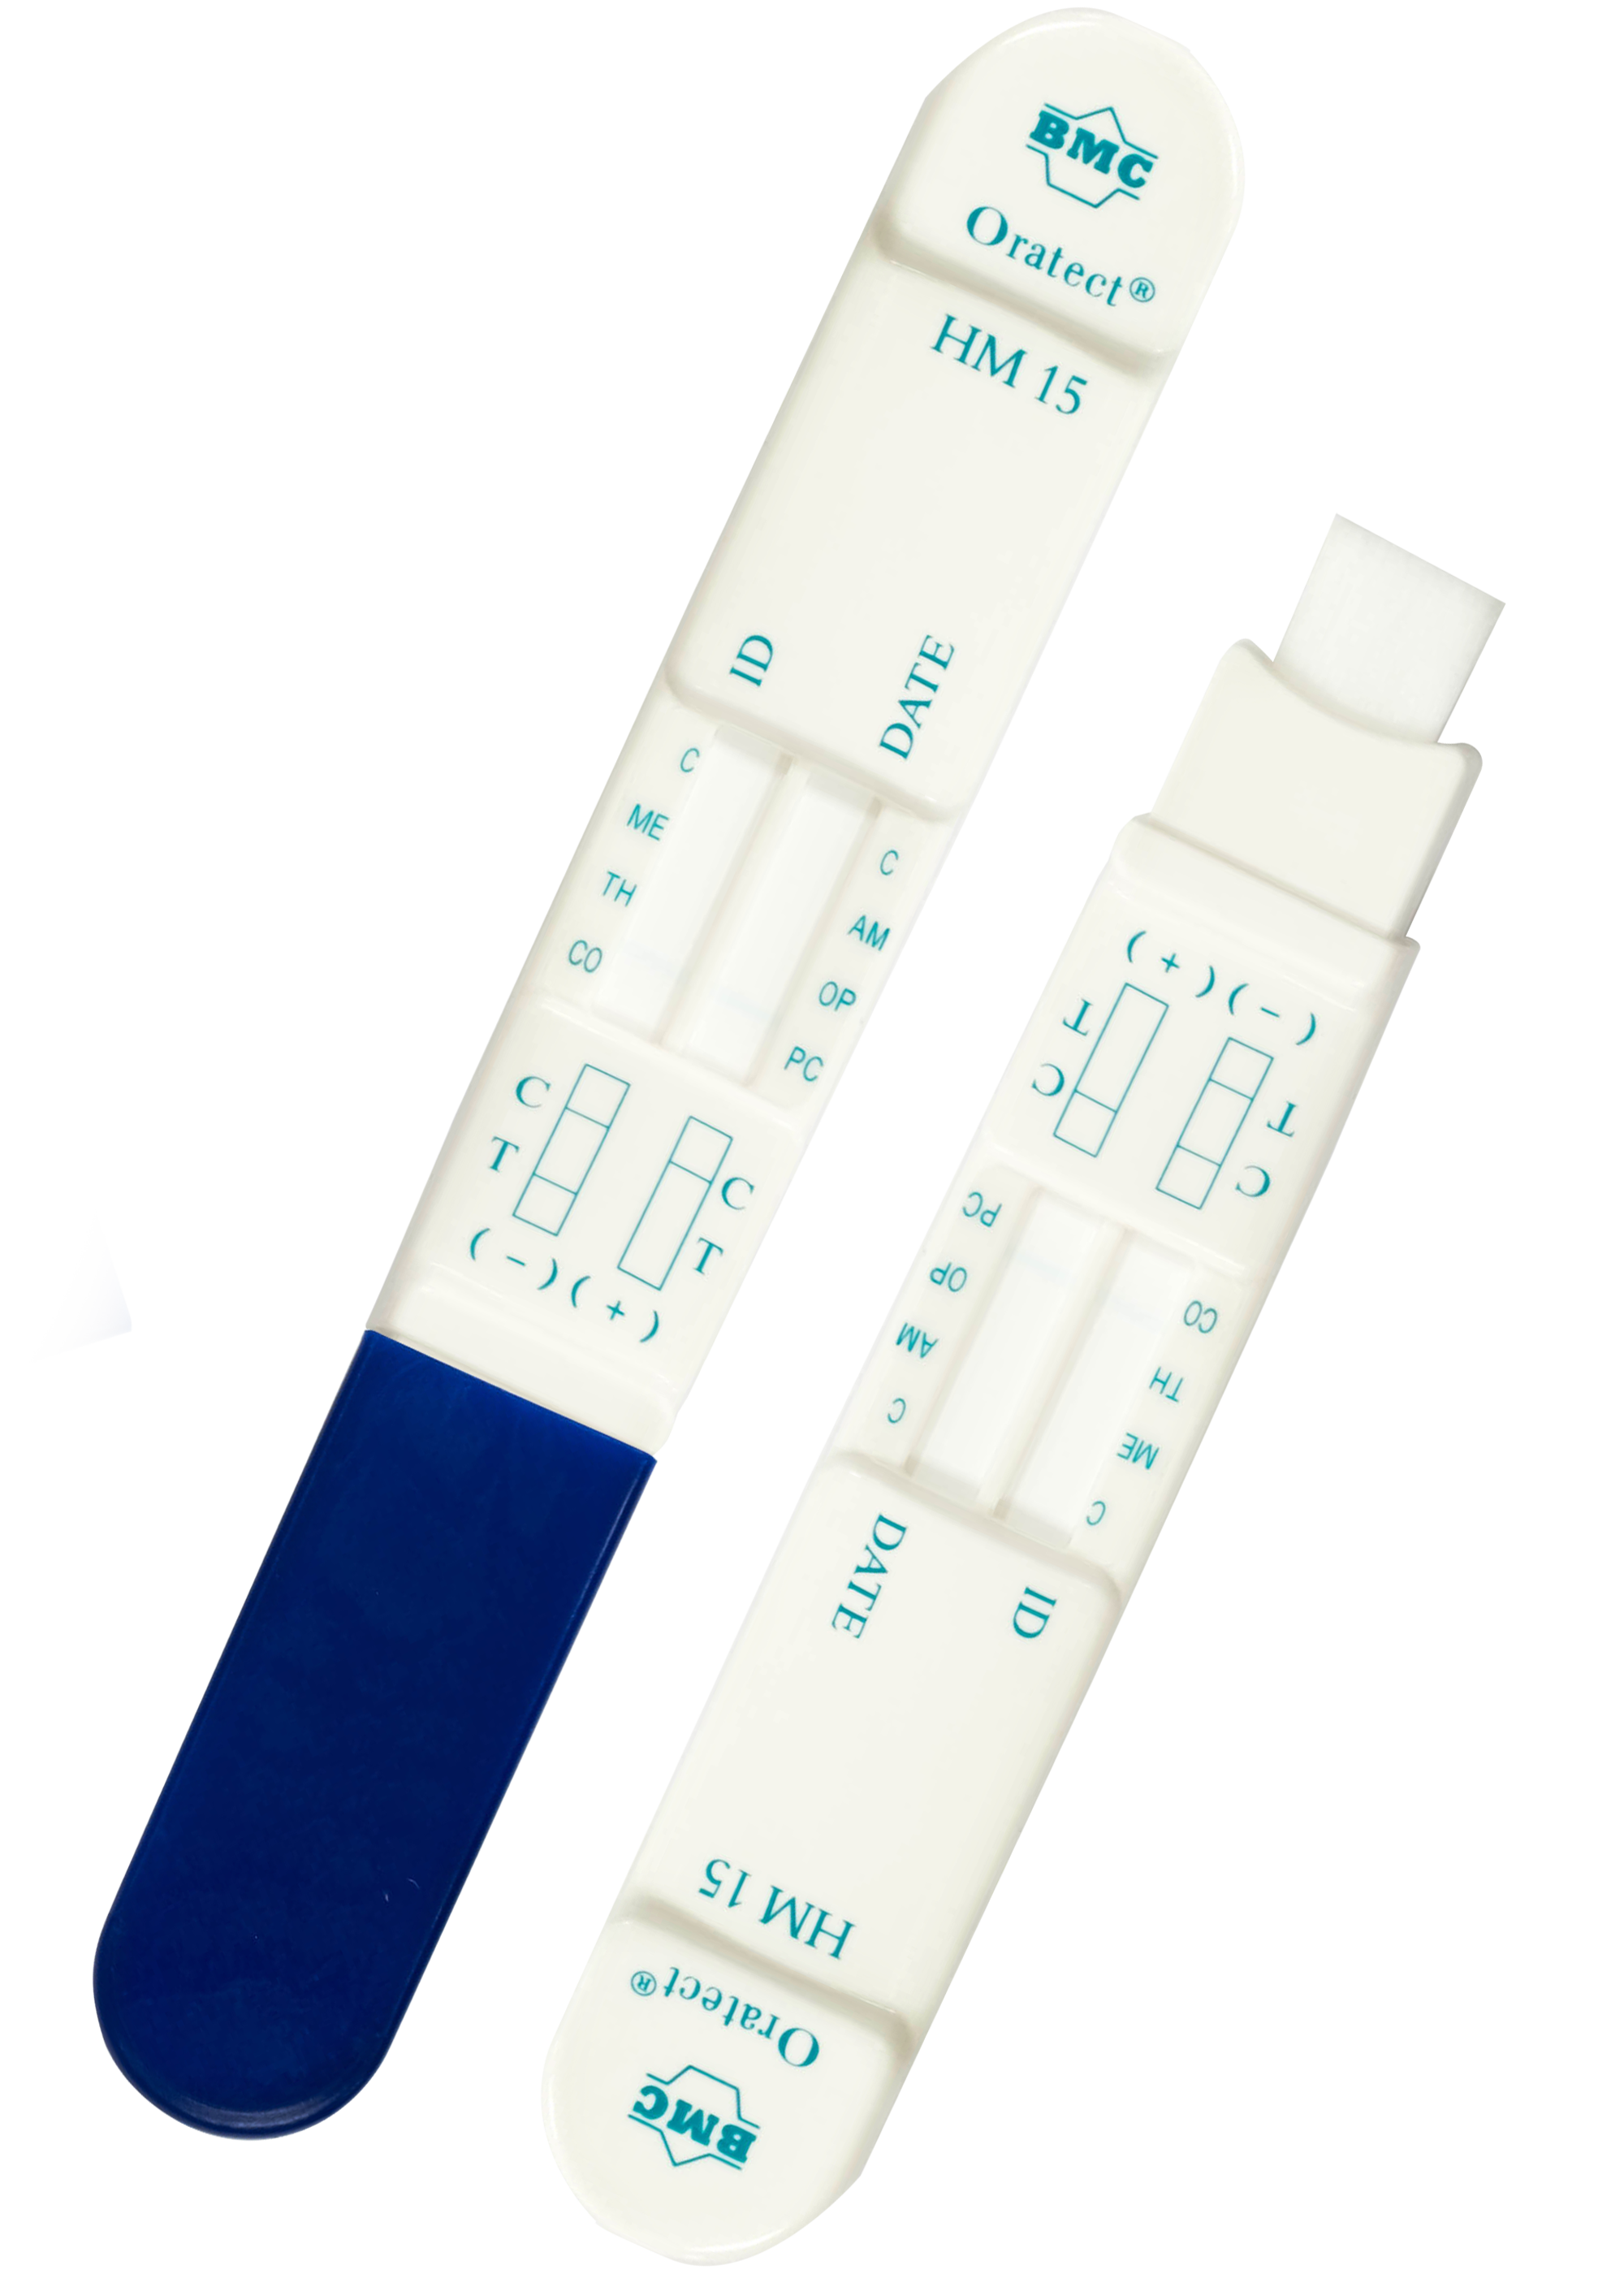 Oratect Oral Fluid Screening Device Certification